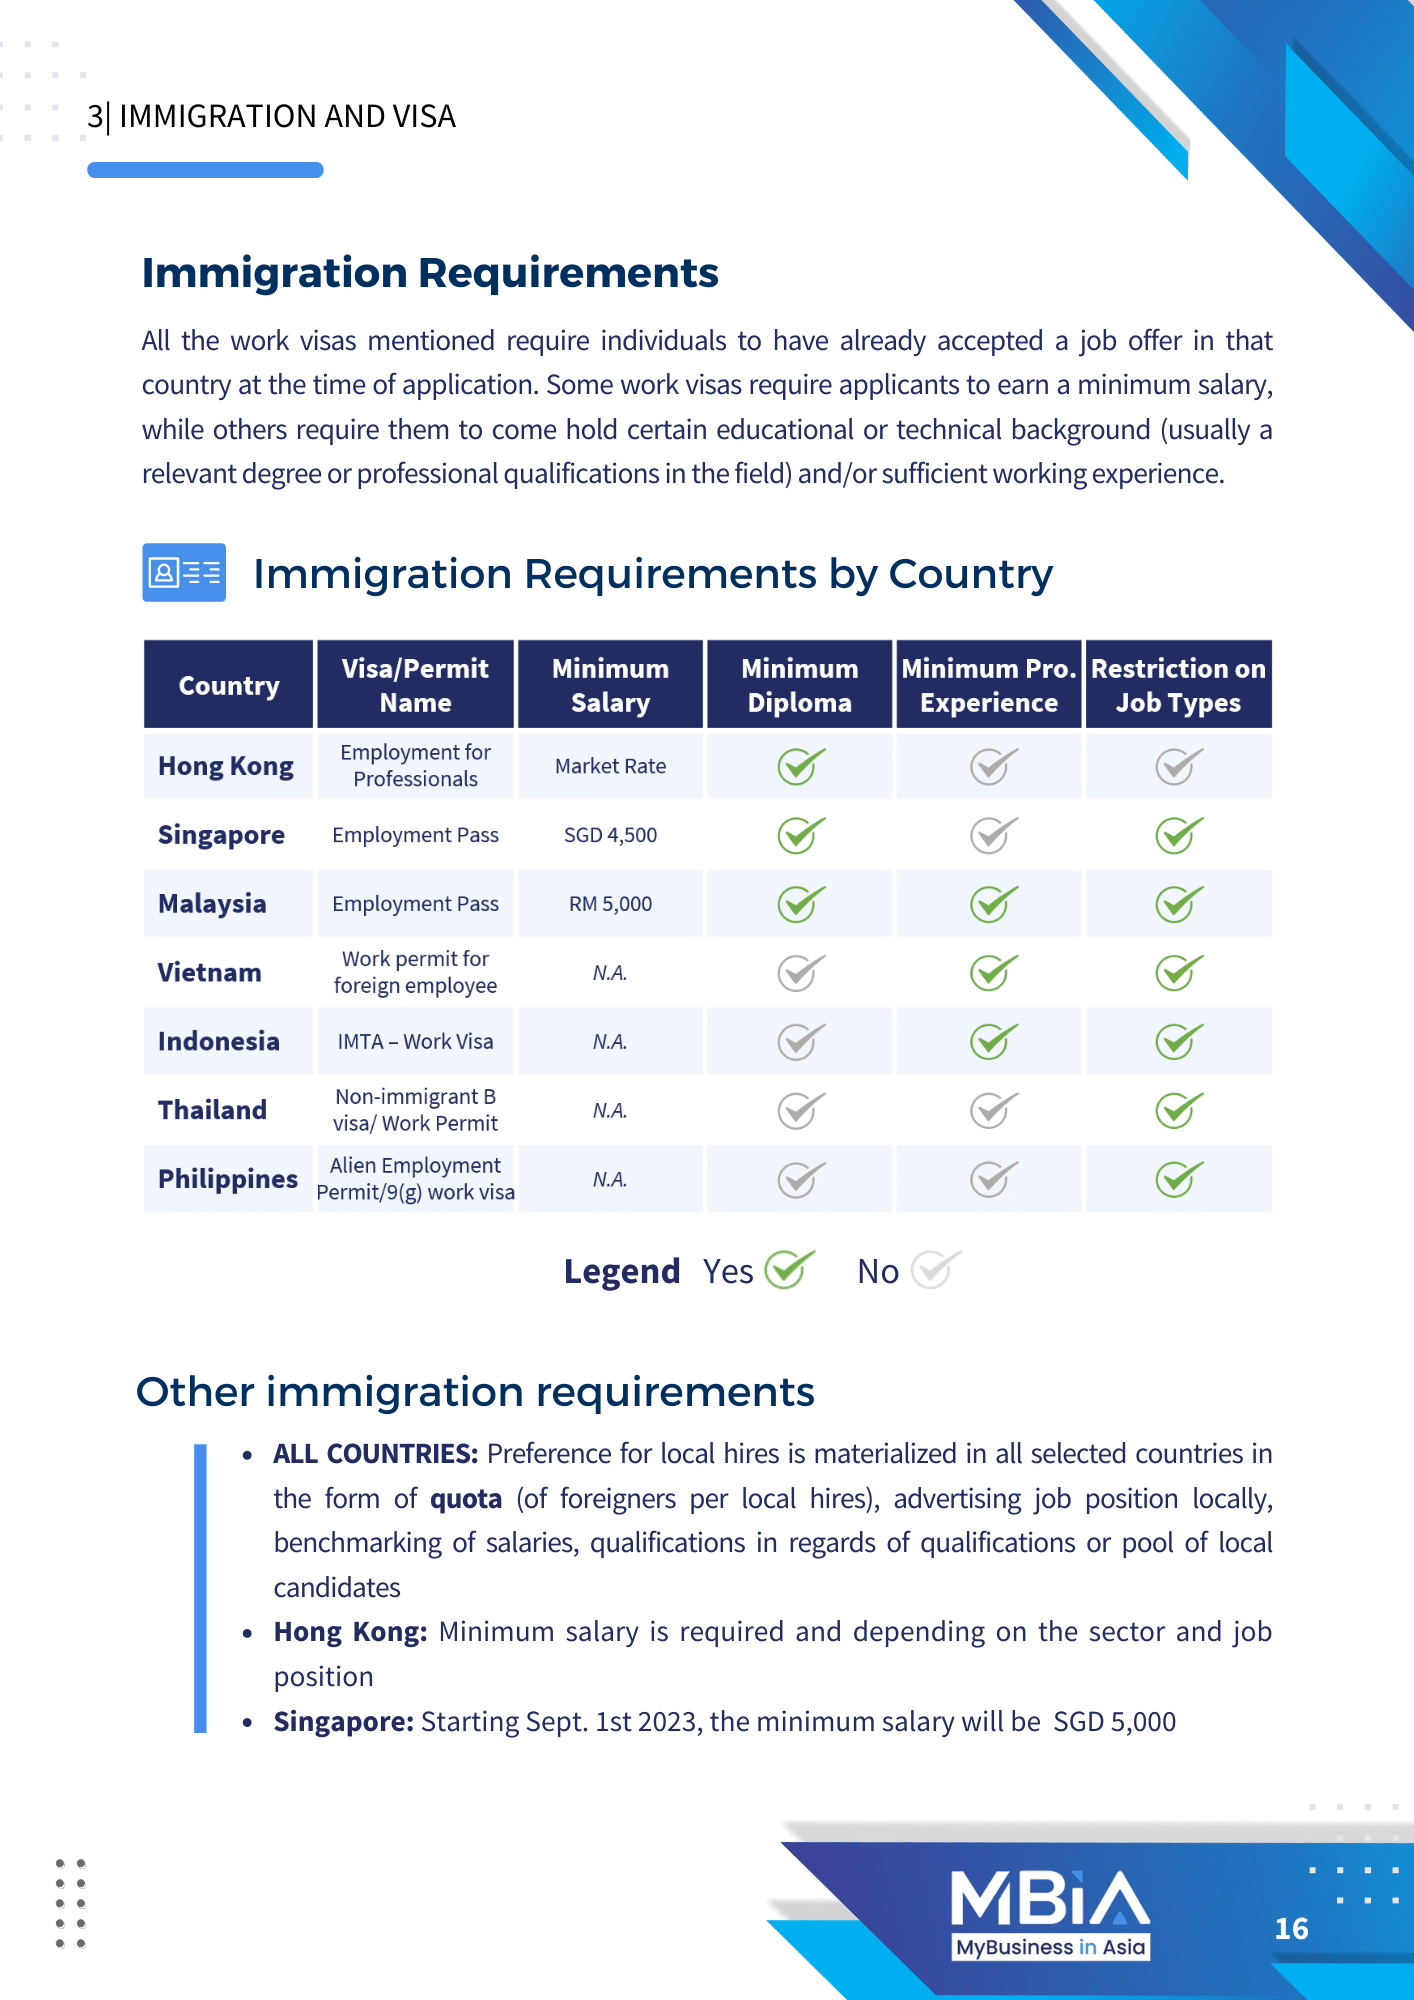 The details of the immigration requirements of the Guide on Setting Up Your Tech Startup in Asia